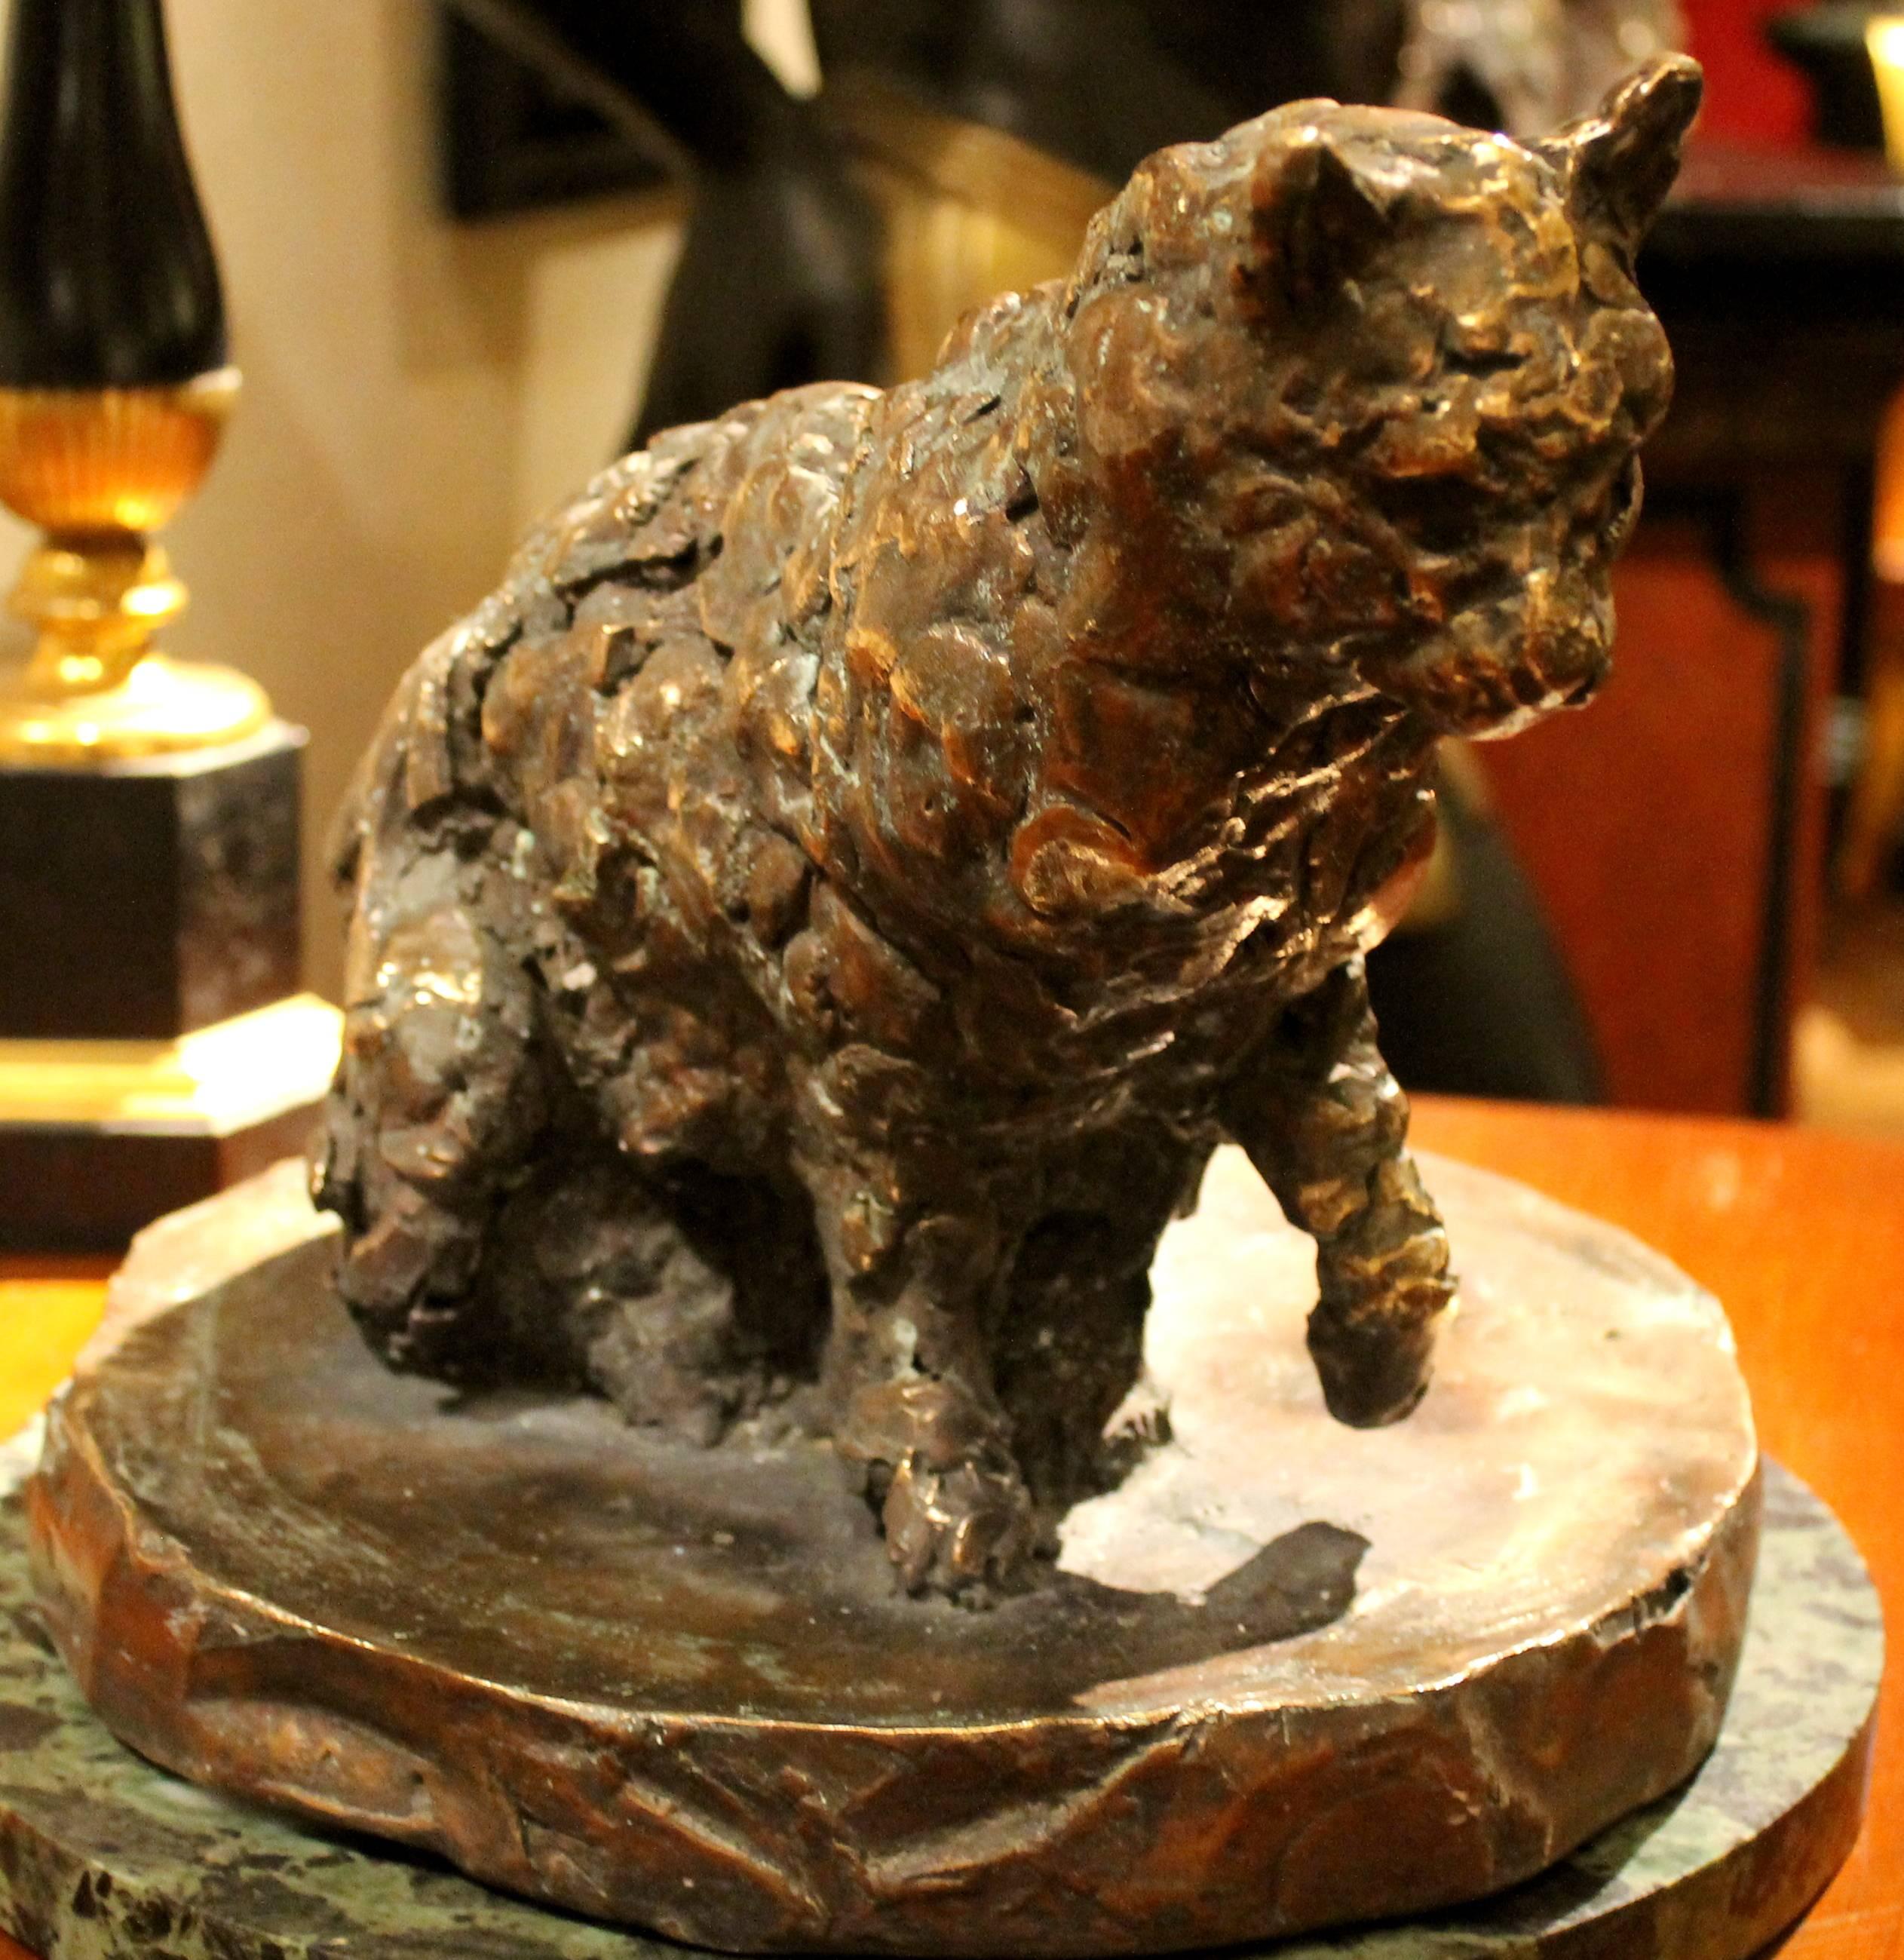 This exquisite solid bronze sculpture of a cat on a round base is handmade with incredible detail, the artist is able to capture a moment frozen in time but on the same time simultaneously creates both movement and static effects. The animal